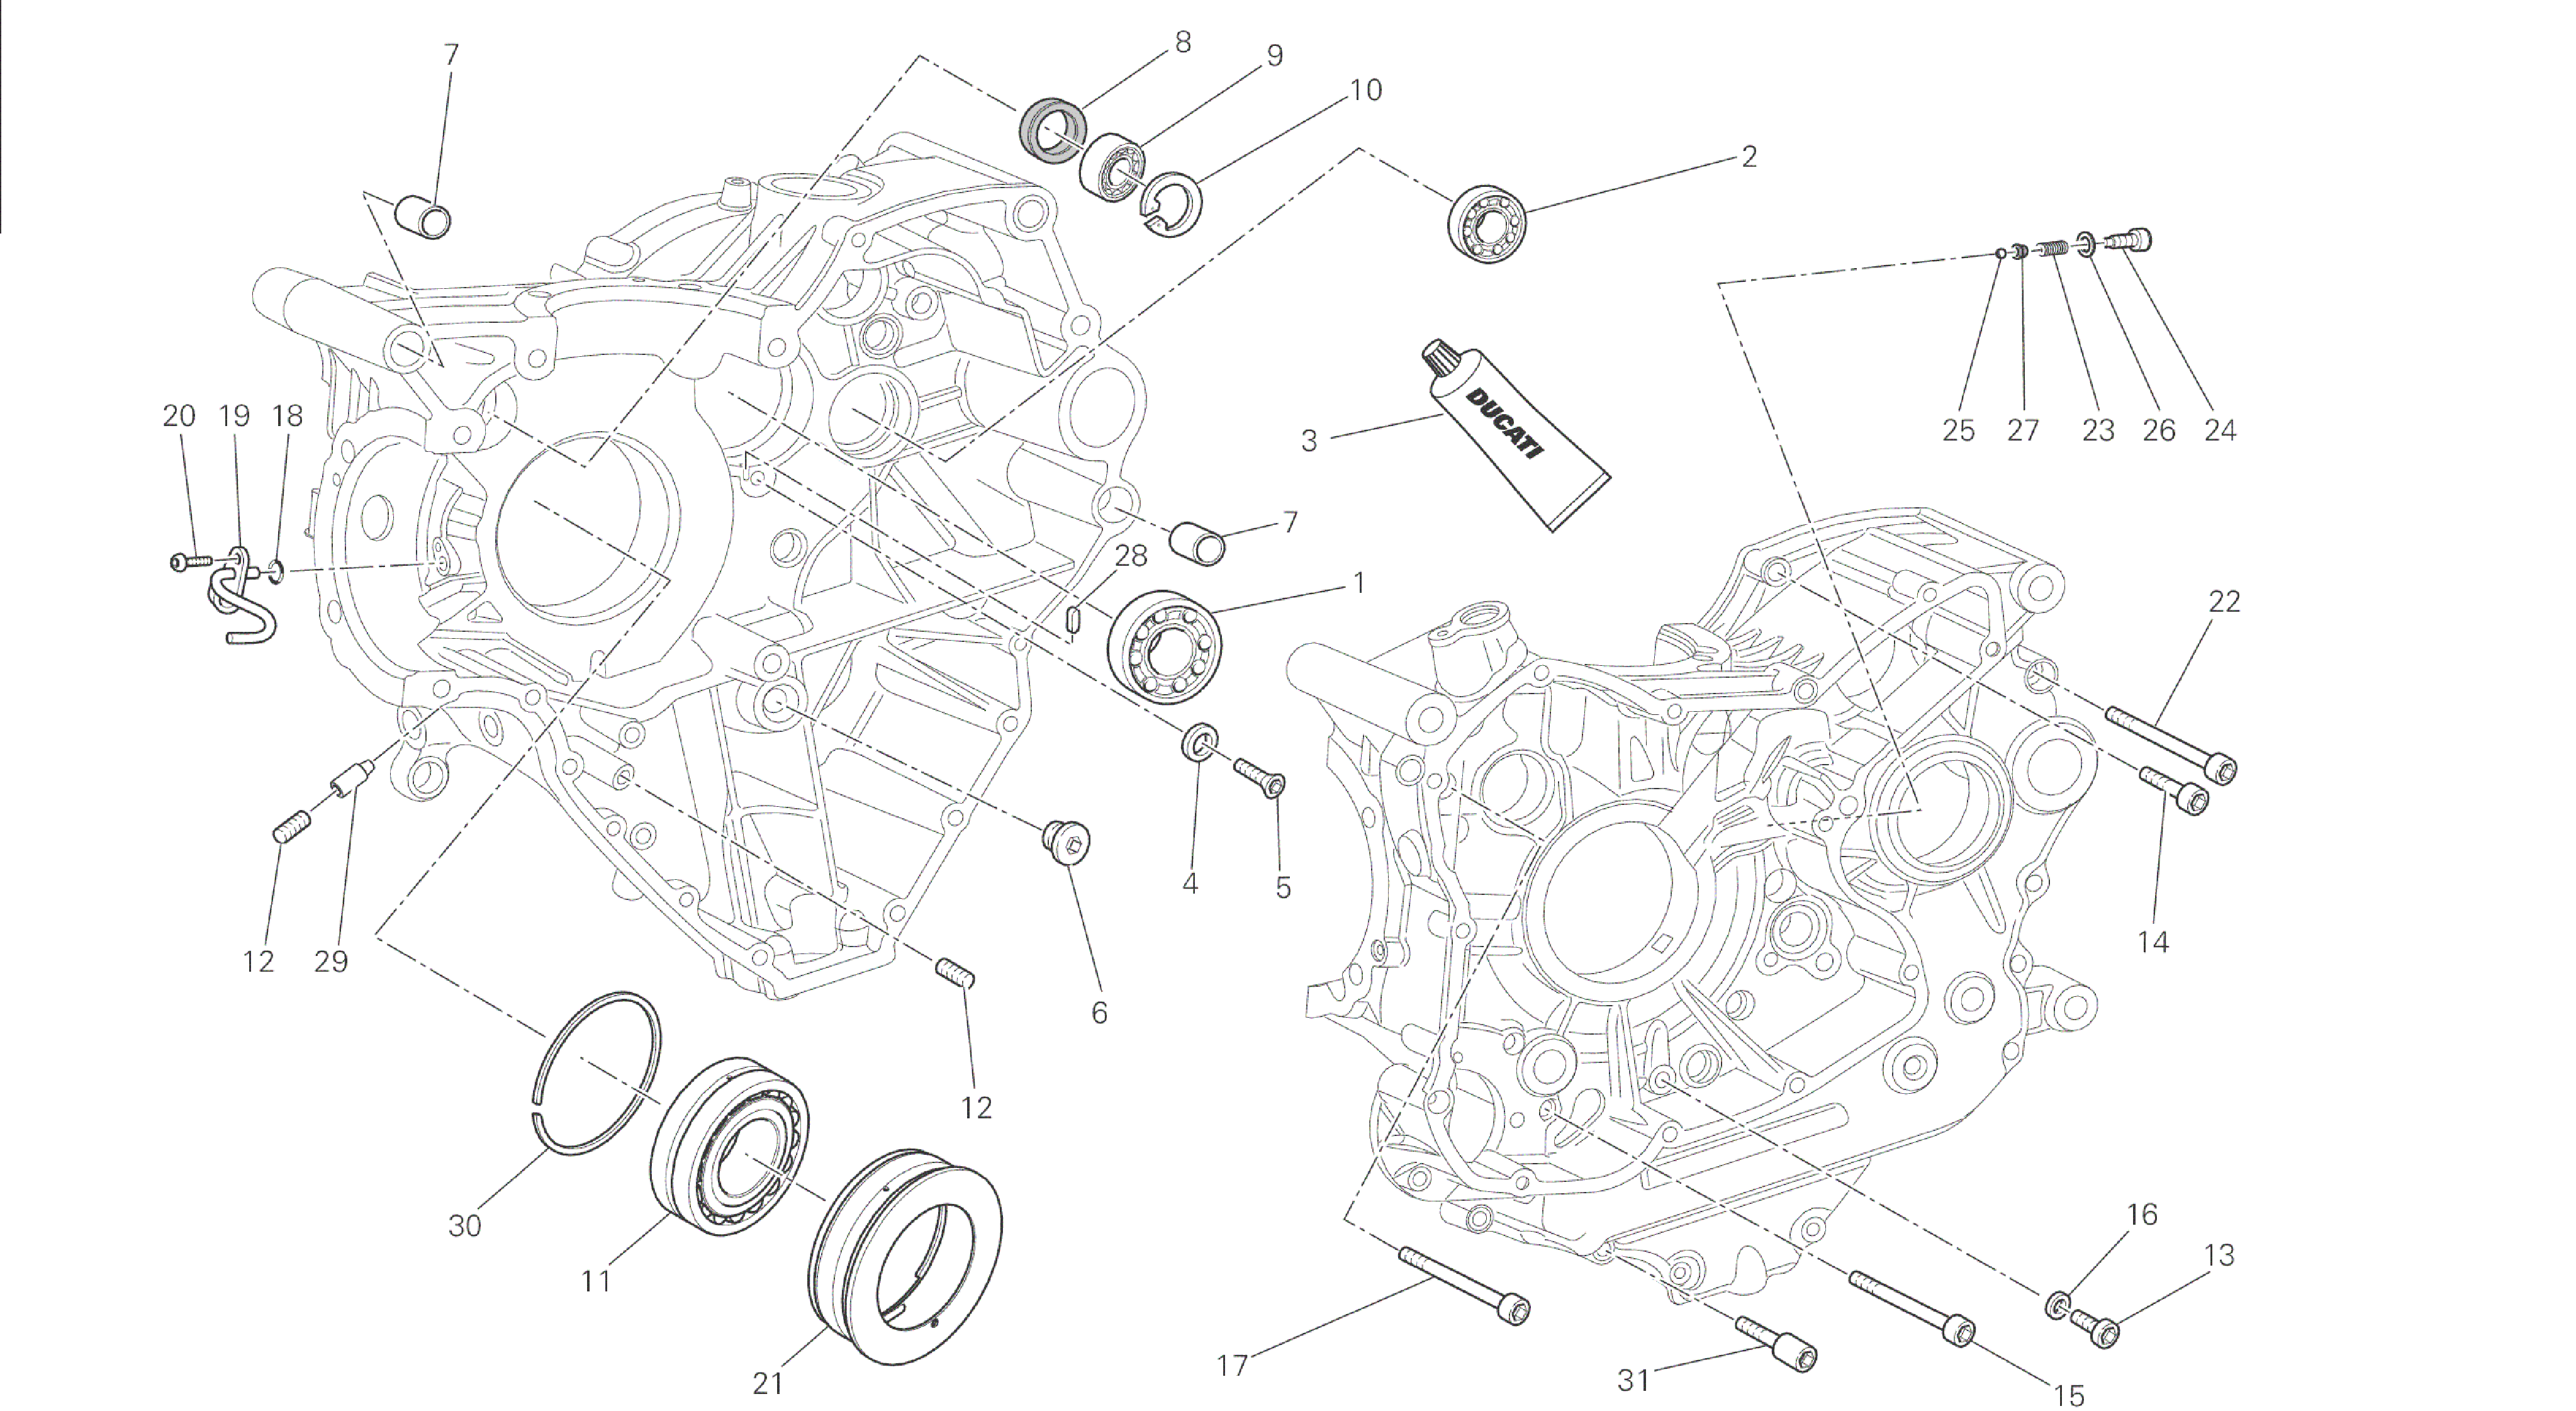 DRAWING 10A - HALF-CRANKCASES PAIR [MOD:M 1200S]GROUP ENGINE